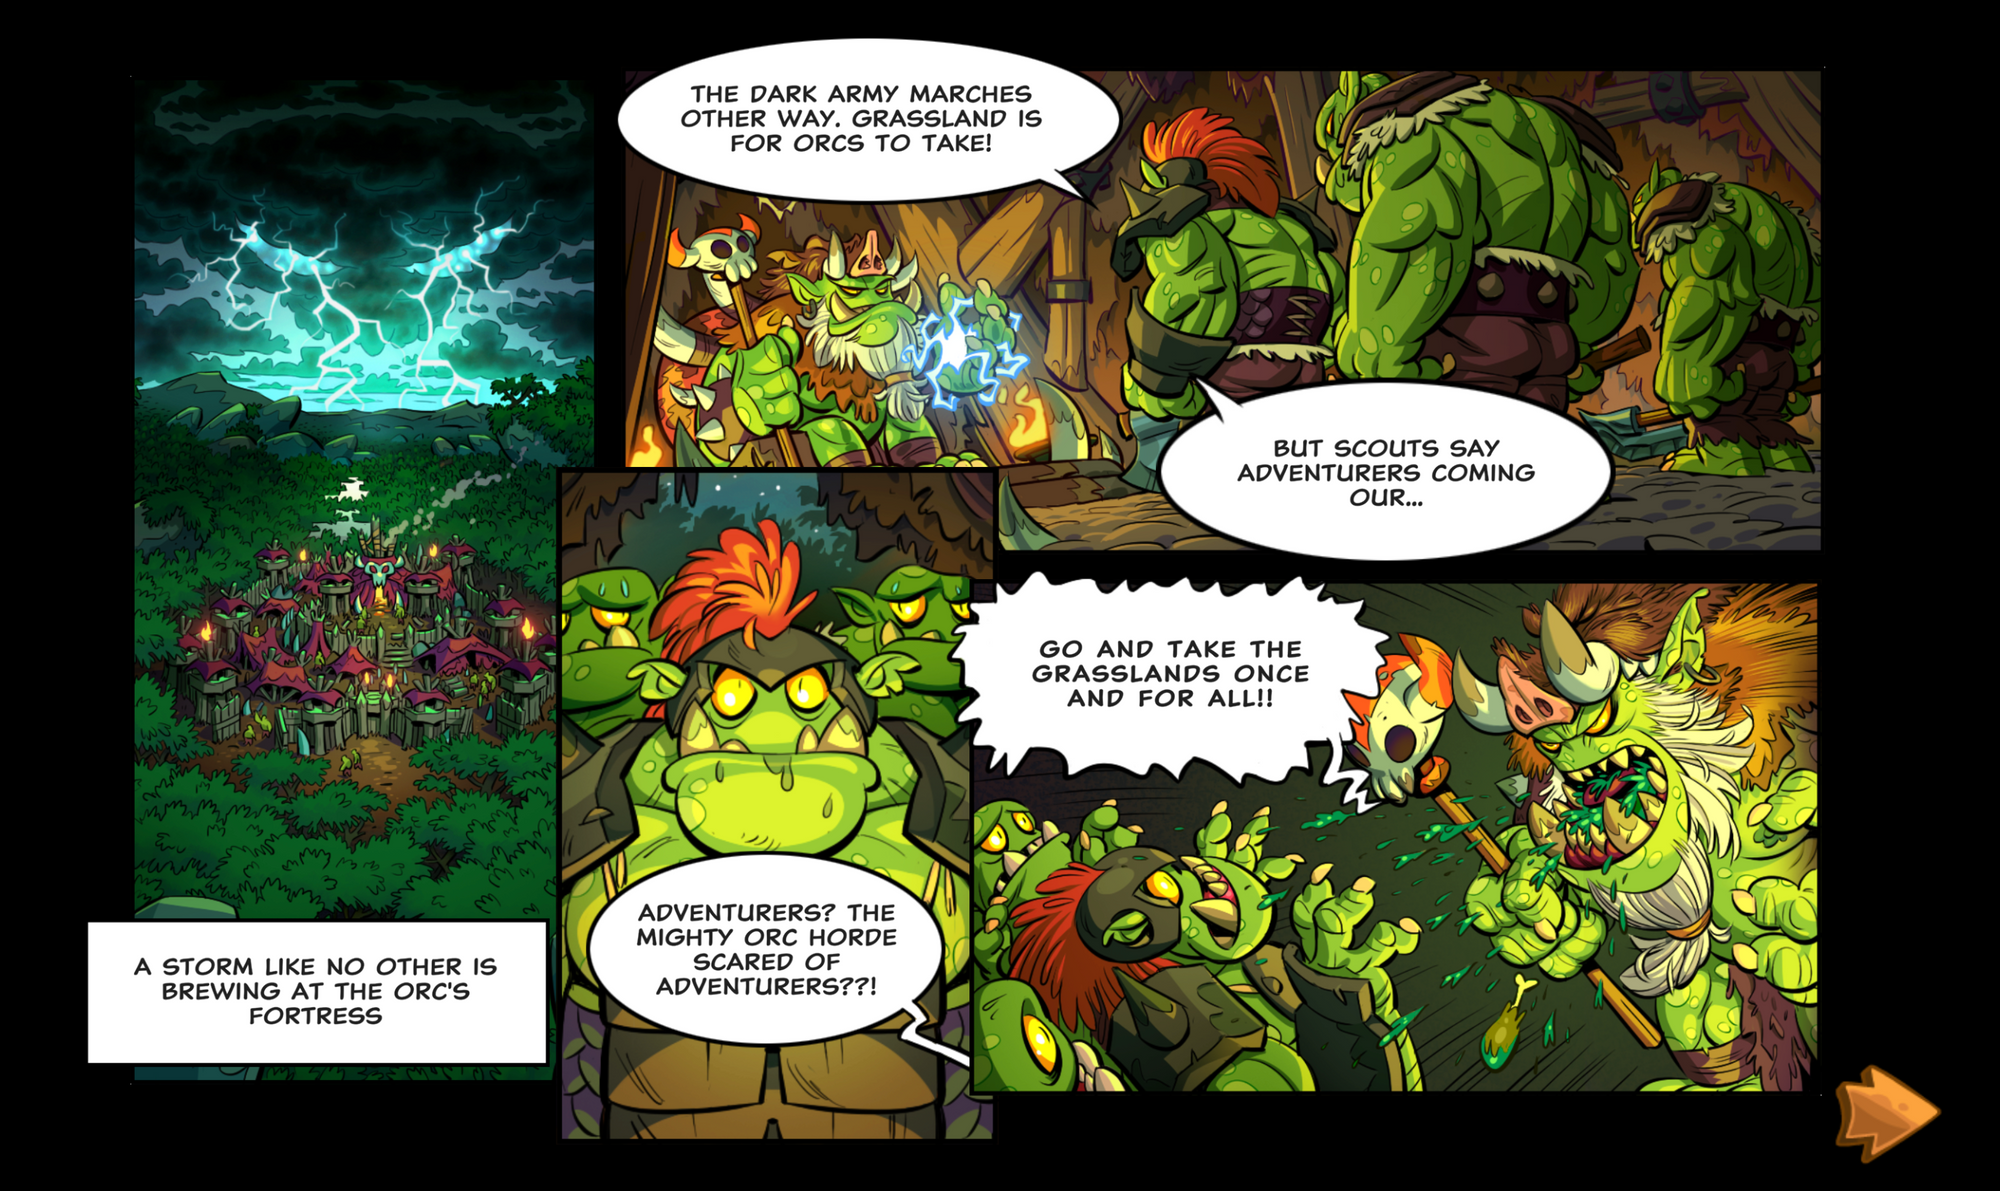 Comic strips of outtakes from the game. A storm is brewing over an orc stronghold, where scouts inform the orc leader of adventurers on the trail.